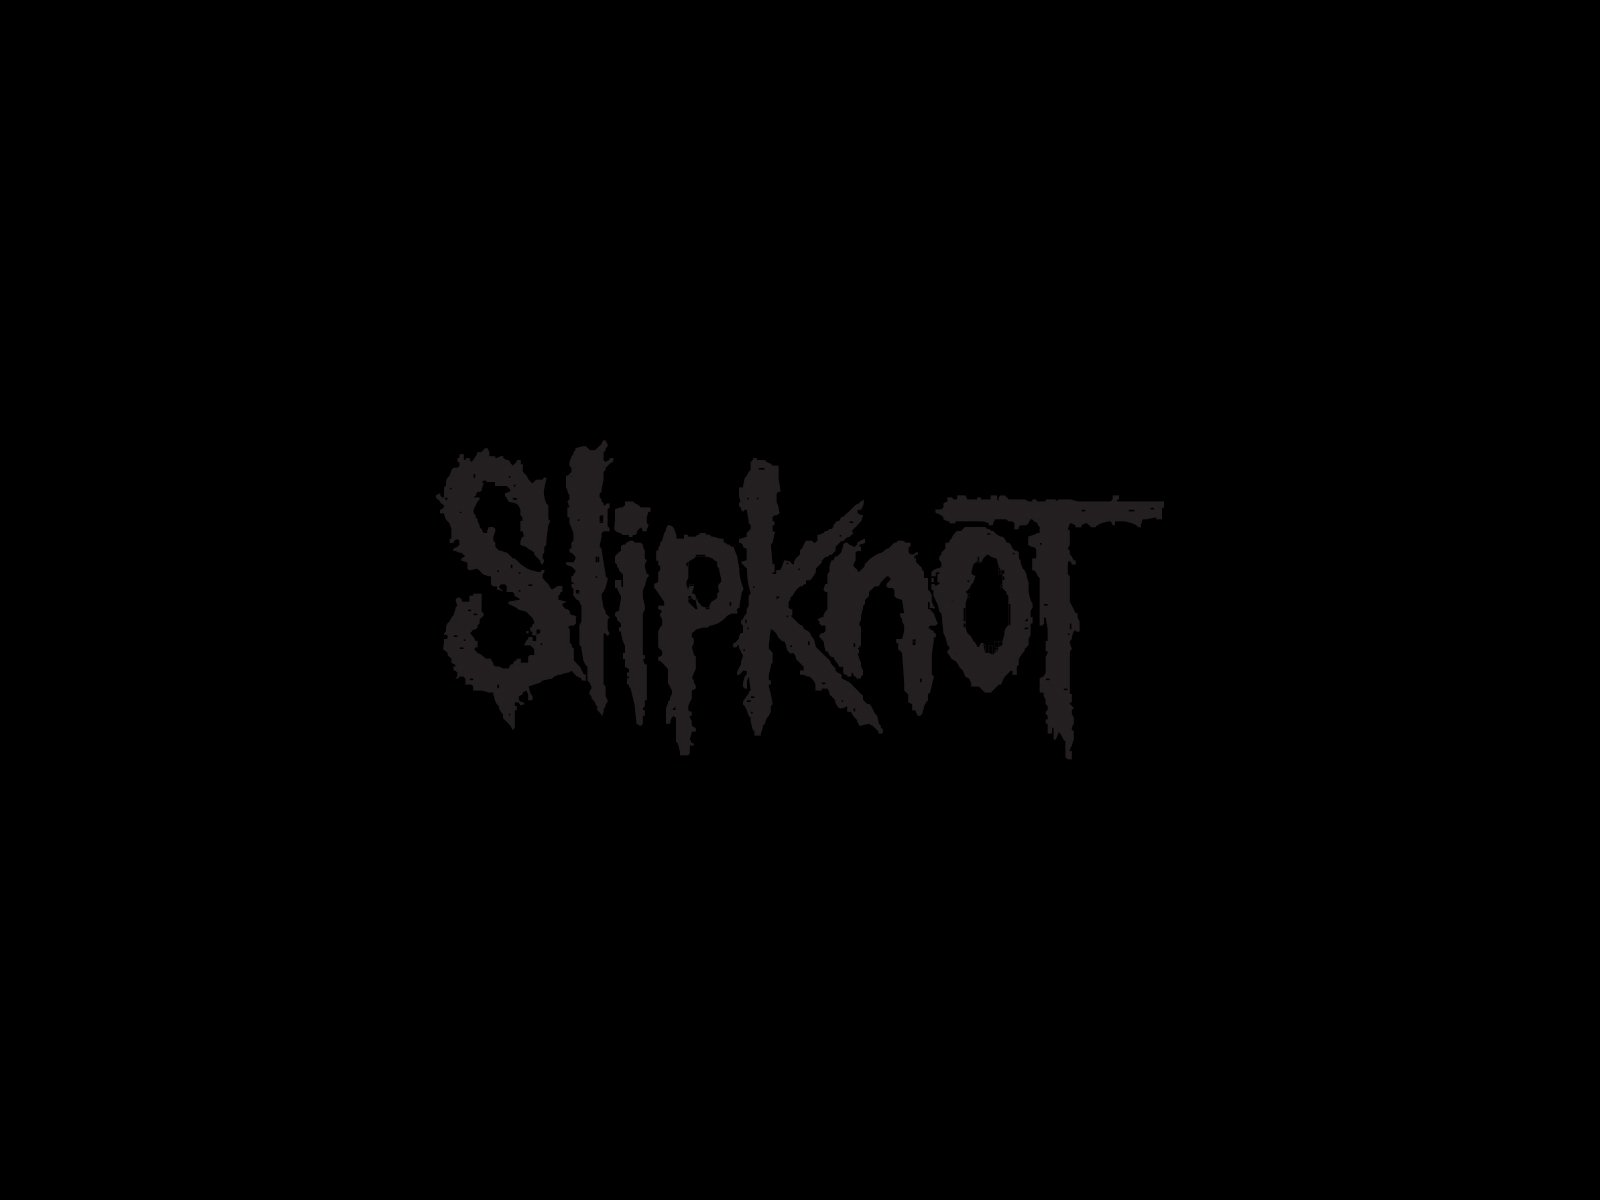 Slipknot Wallpaper And Background Image 1600x10